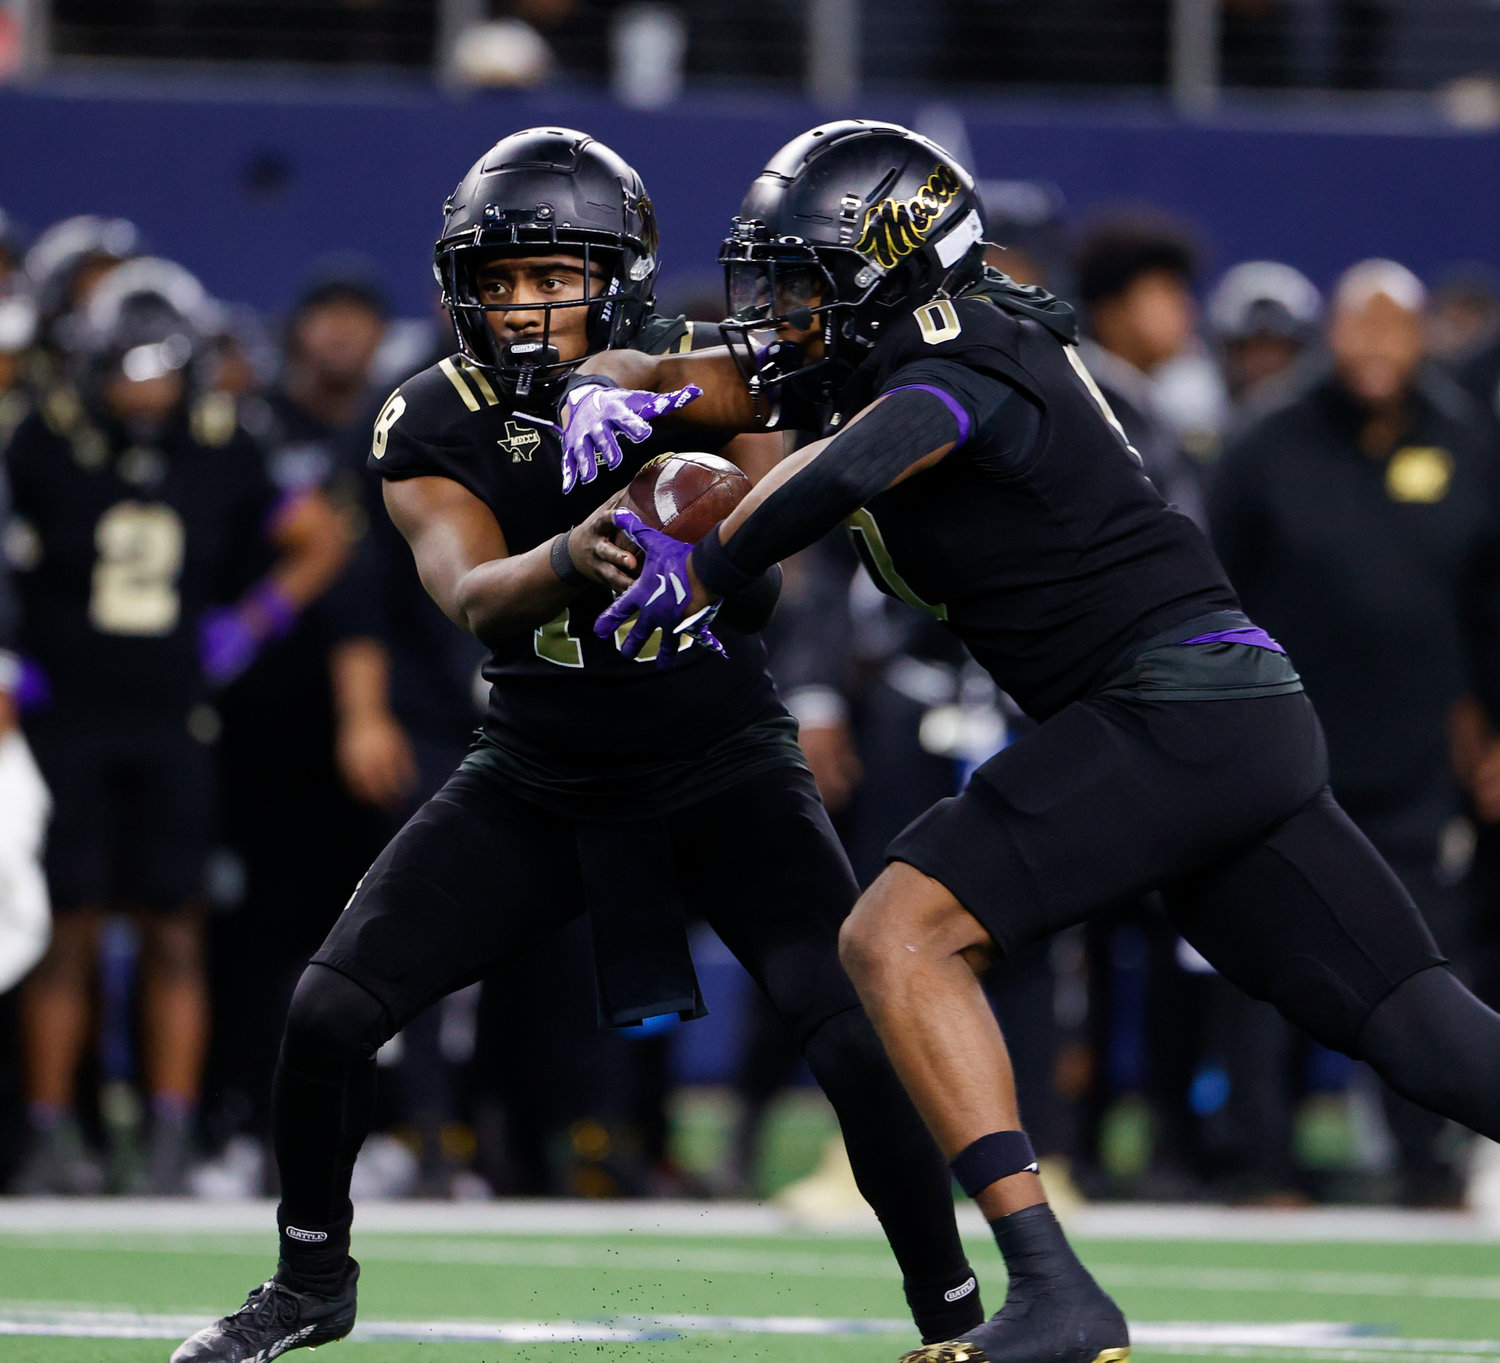 South Oak Cliff quarterback William Little (18) hands the ball off to running back Jayvon Thomas (0) during the Class 5A Division II football state championship game between South Oak Cliff and Port Neches-Groves in Arlington, Texas, on Dec. 16, 2022.